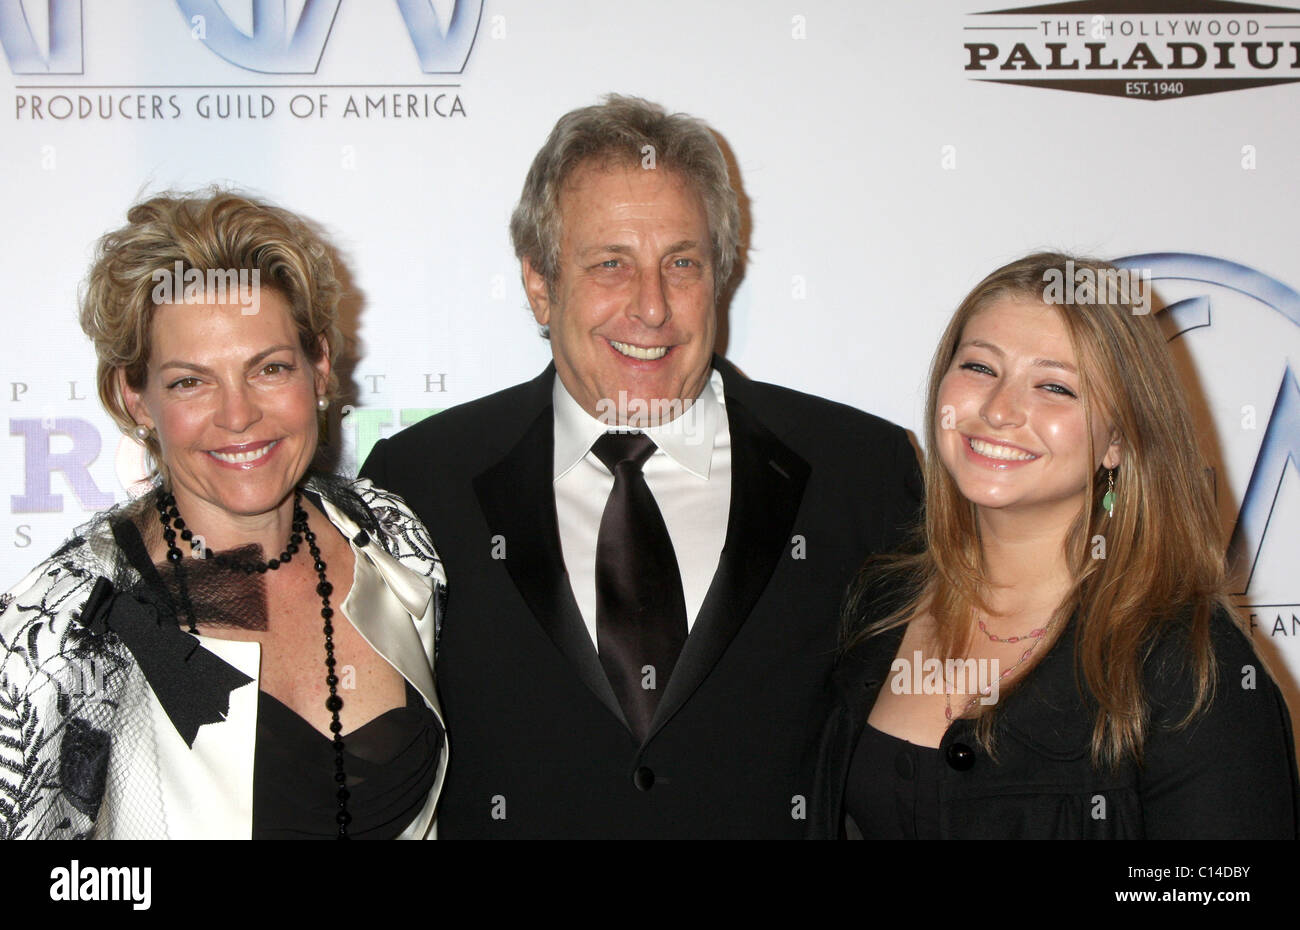 Stephanie Haymes, Charles Roven, Rebecca Steel Roven 20th Annual Producers Guild Awards held at The Hollywood Palladium Stock Photo